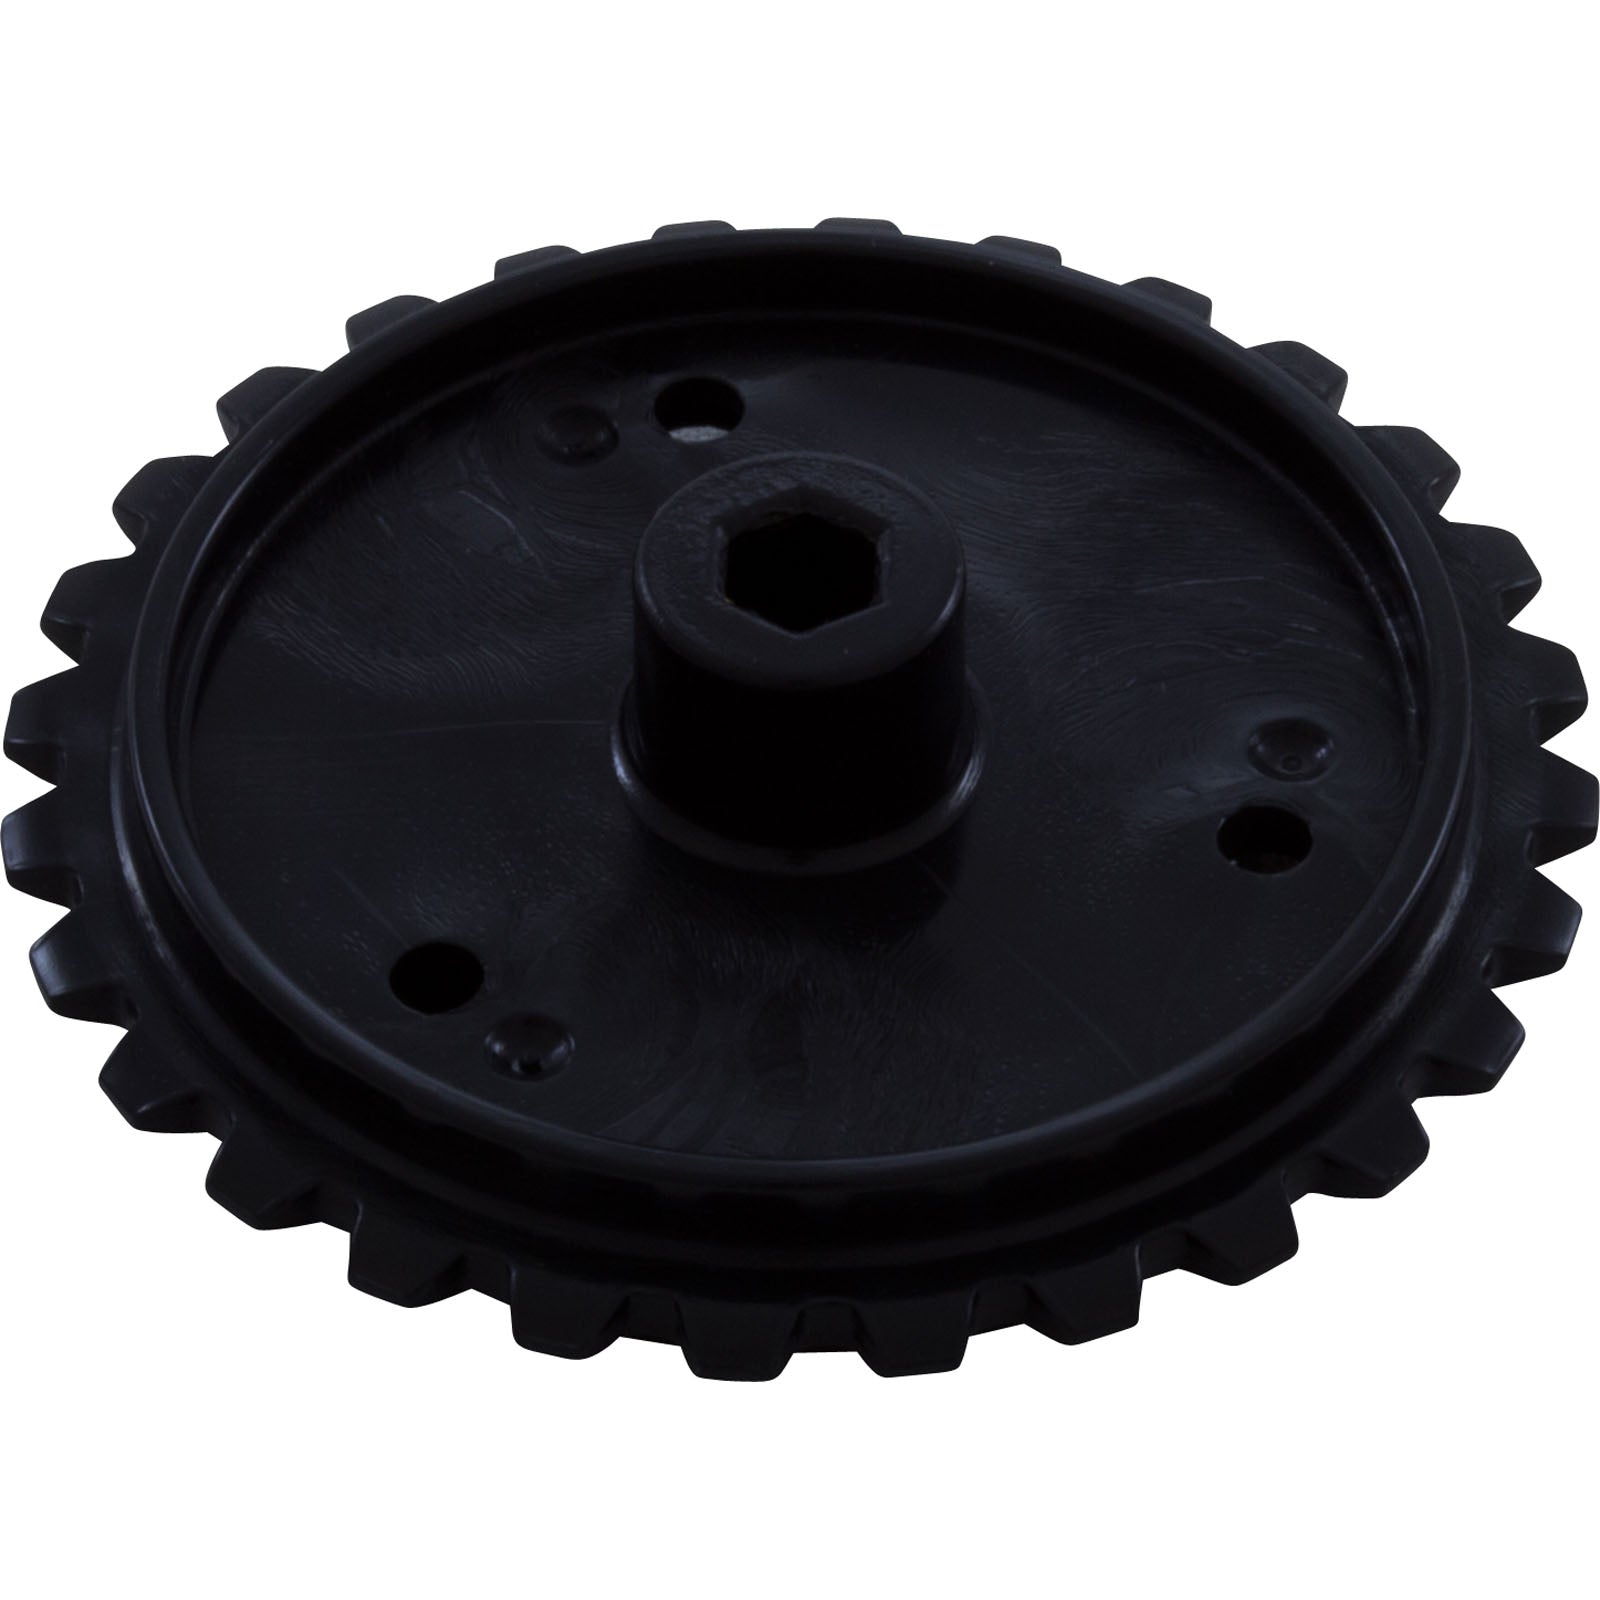 Zodiac/Polaris R0547500 Drive Sprocket Assembly for 3900 Sport Robotic Pool Cleaner